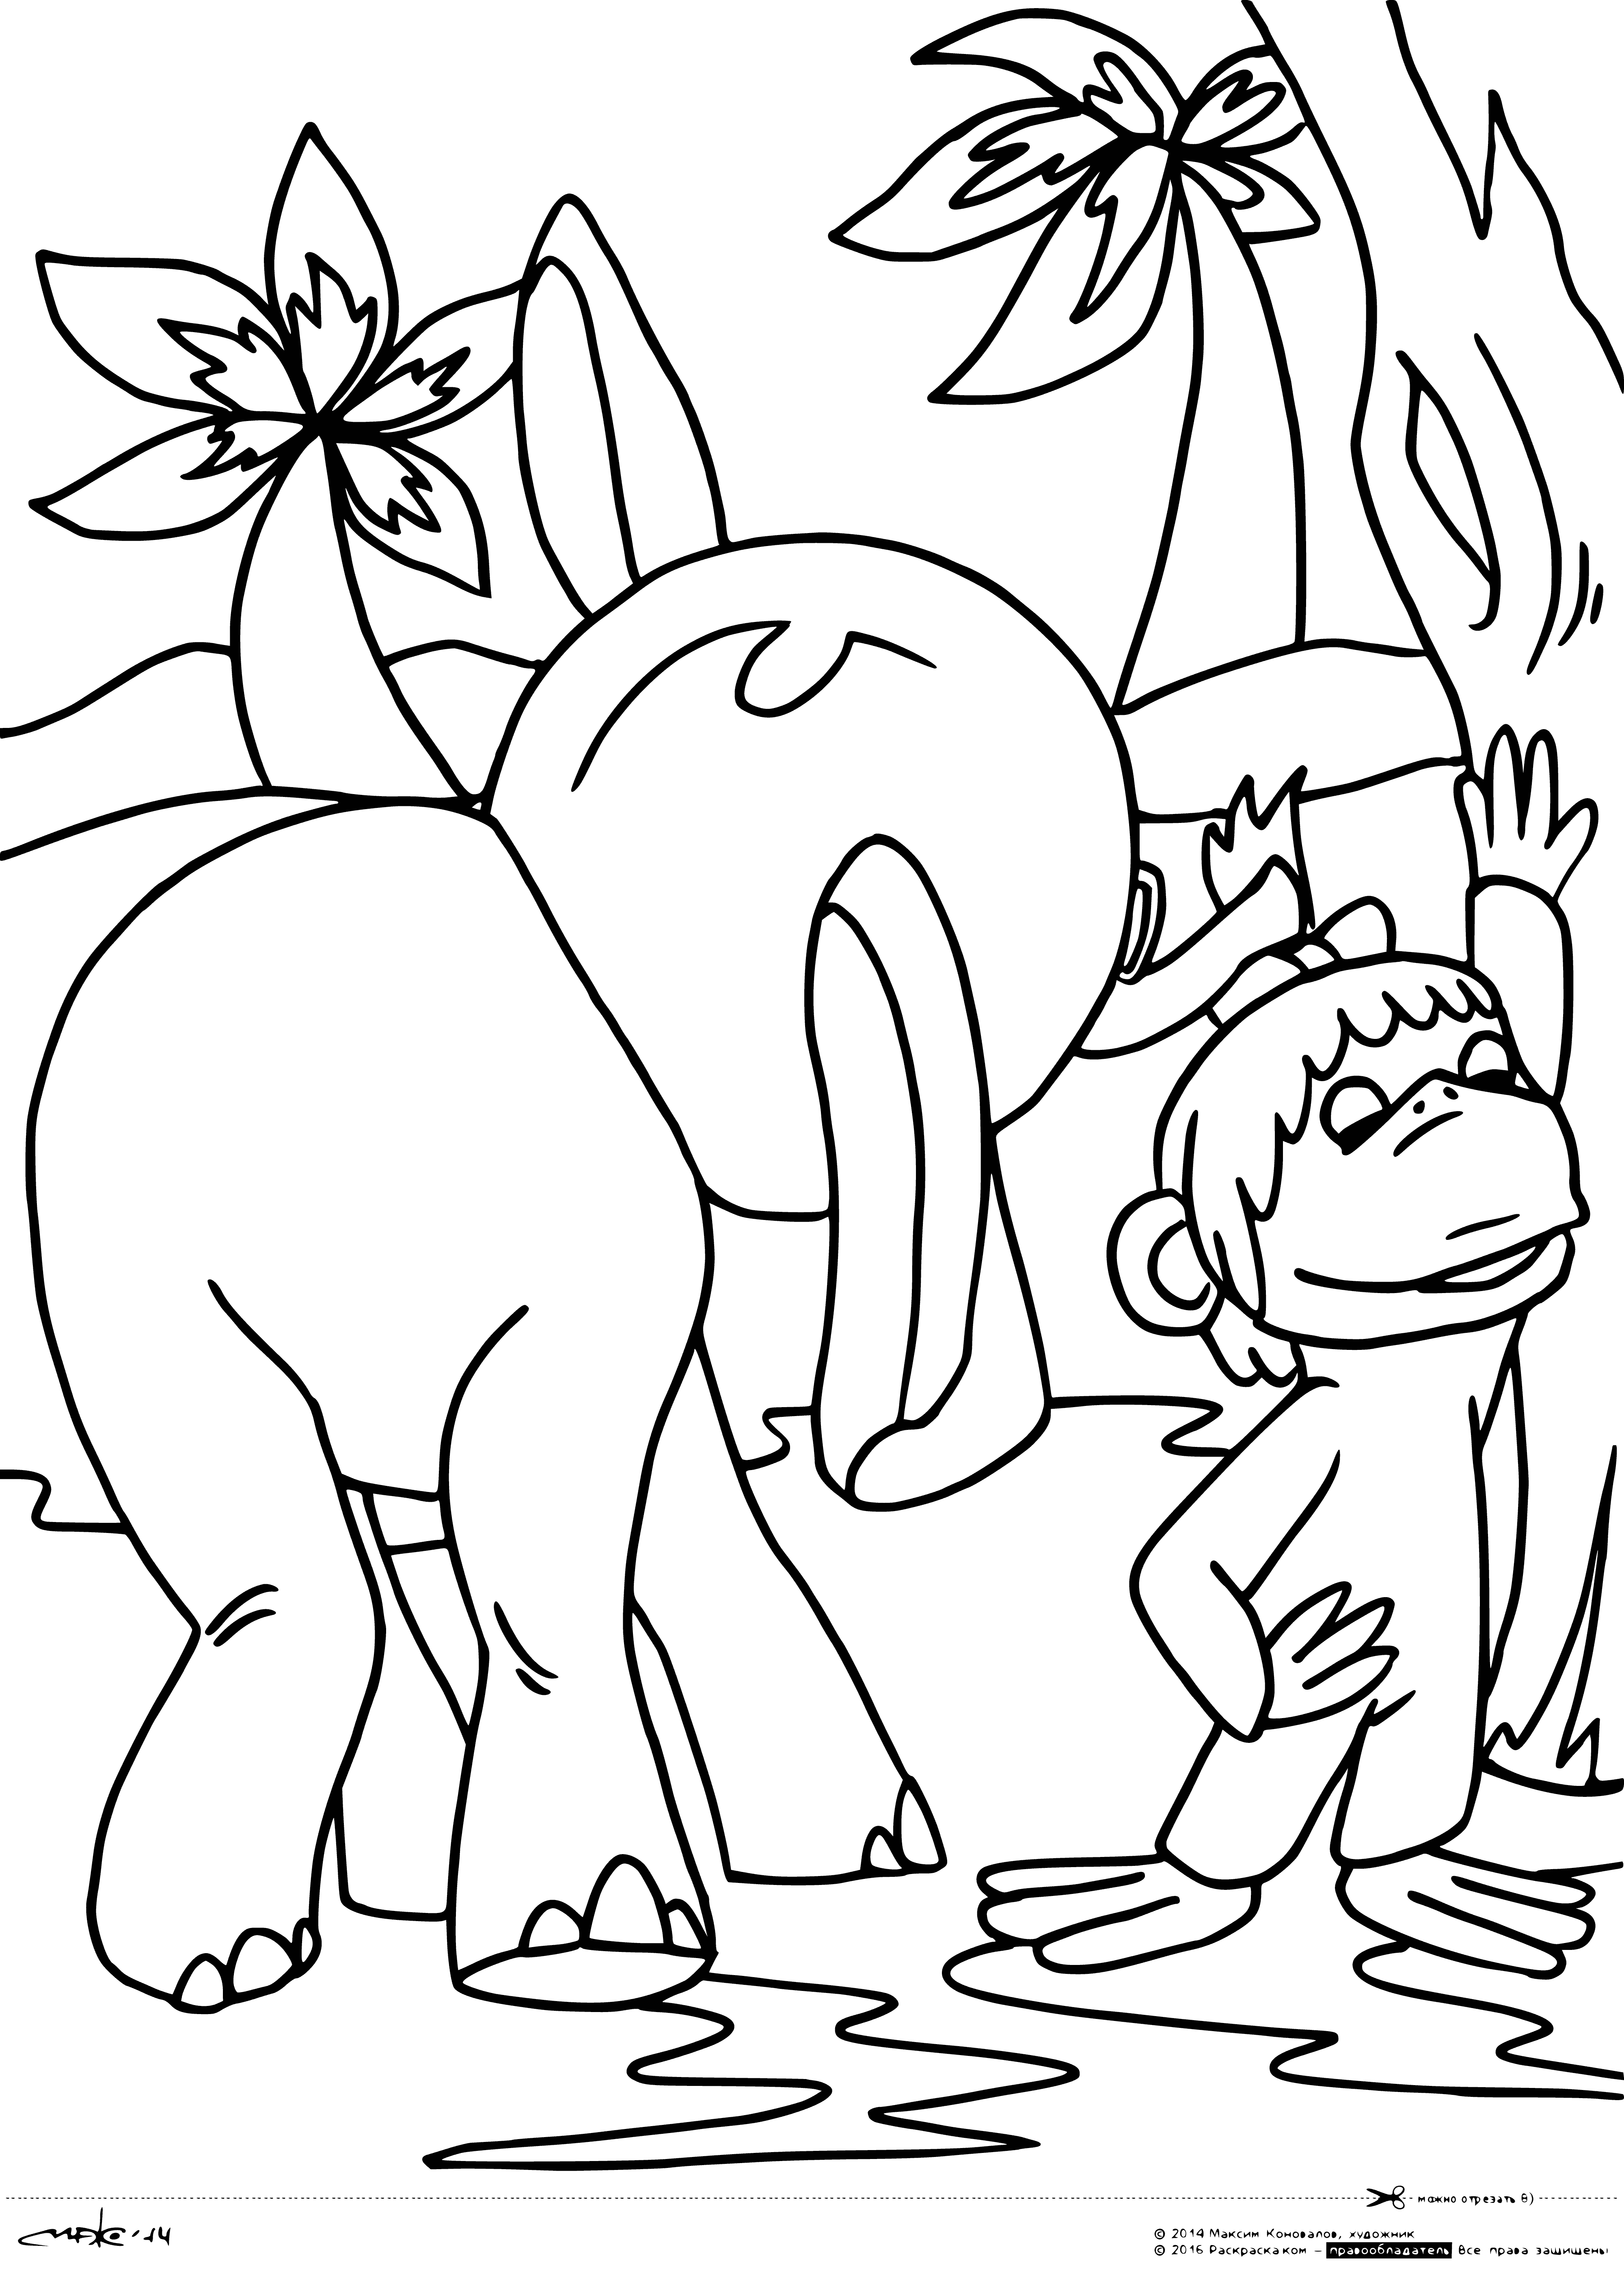 coloring page: 38 parrots, baby elephant & monkey on coloring page-different colors, ellie gray, monkey brown w/long tail.